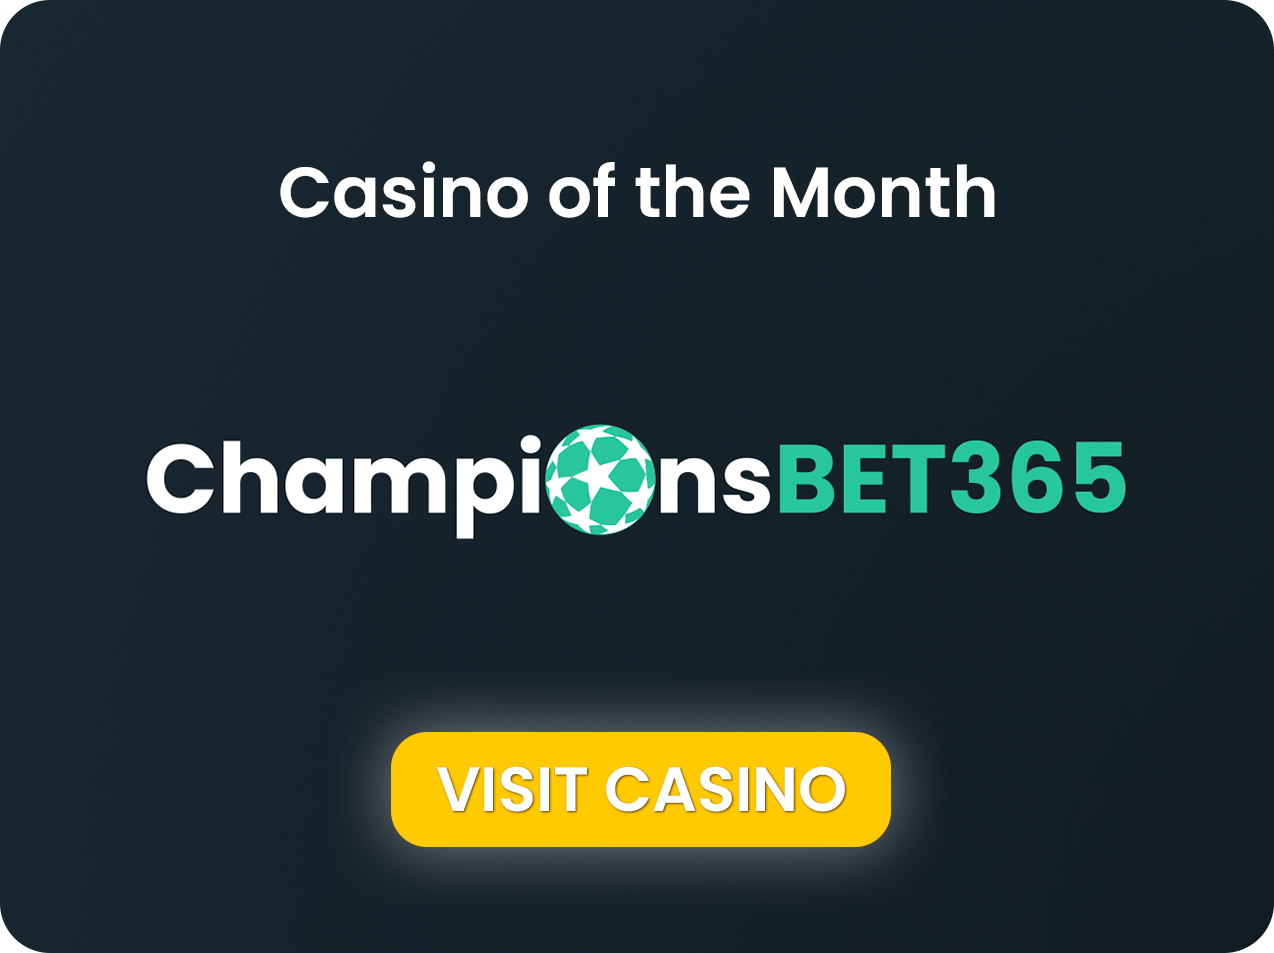 Championsbet365 Casino of the Month